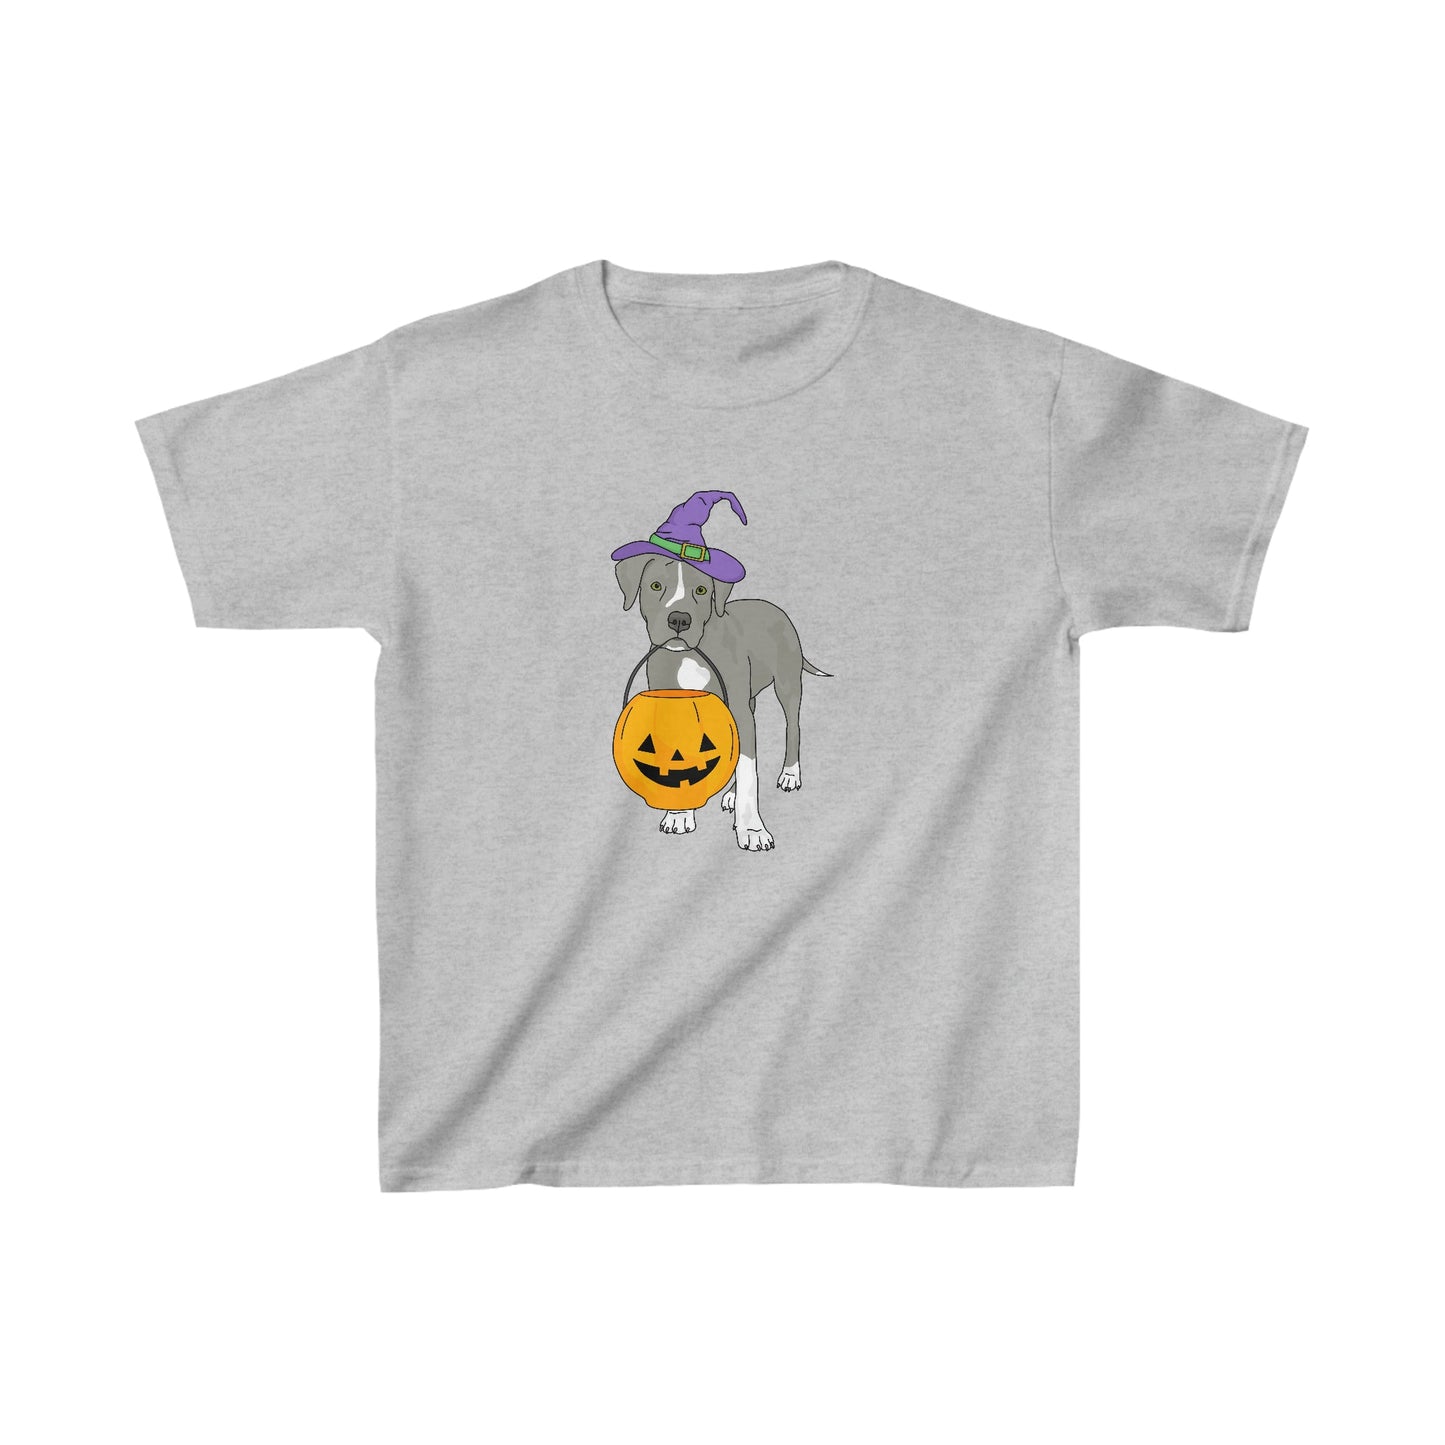 Witchy Puppy | **YOUTH SIZE** Tee - Detezi Designs-15981135264727307967